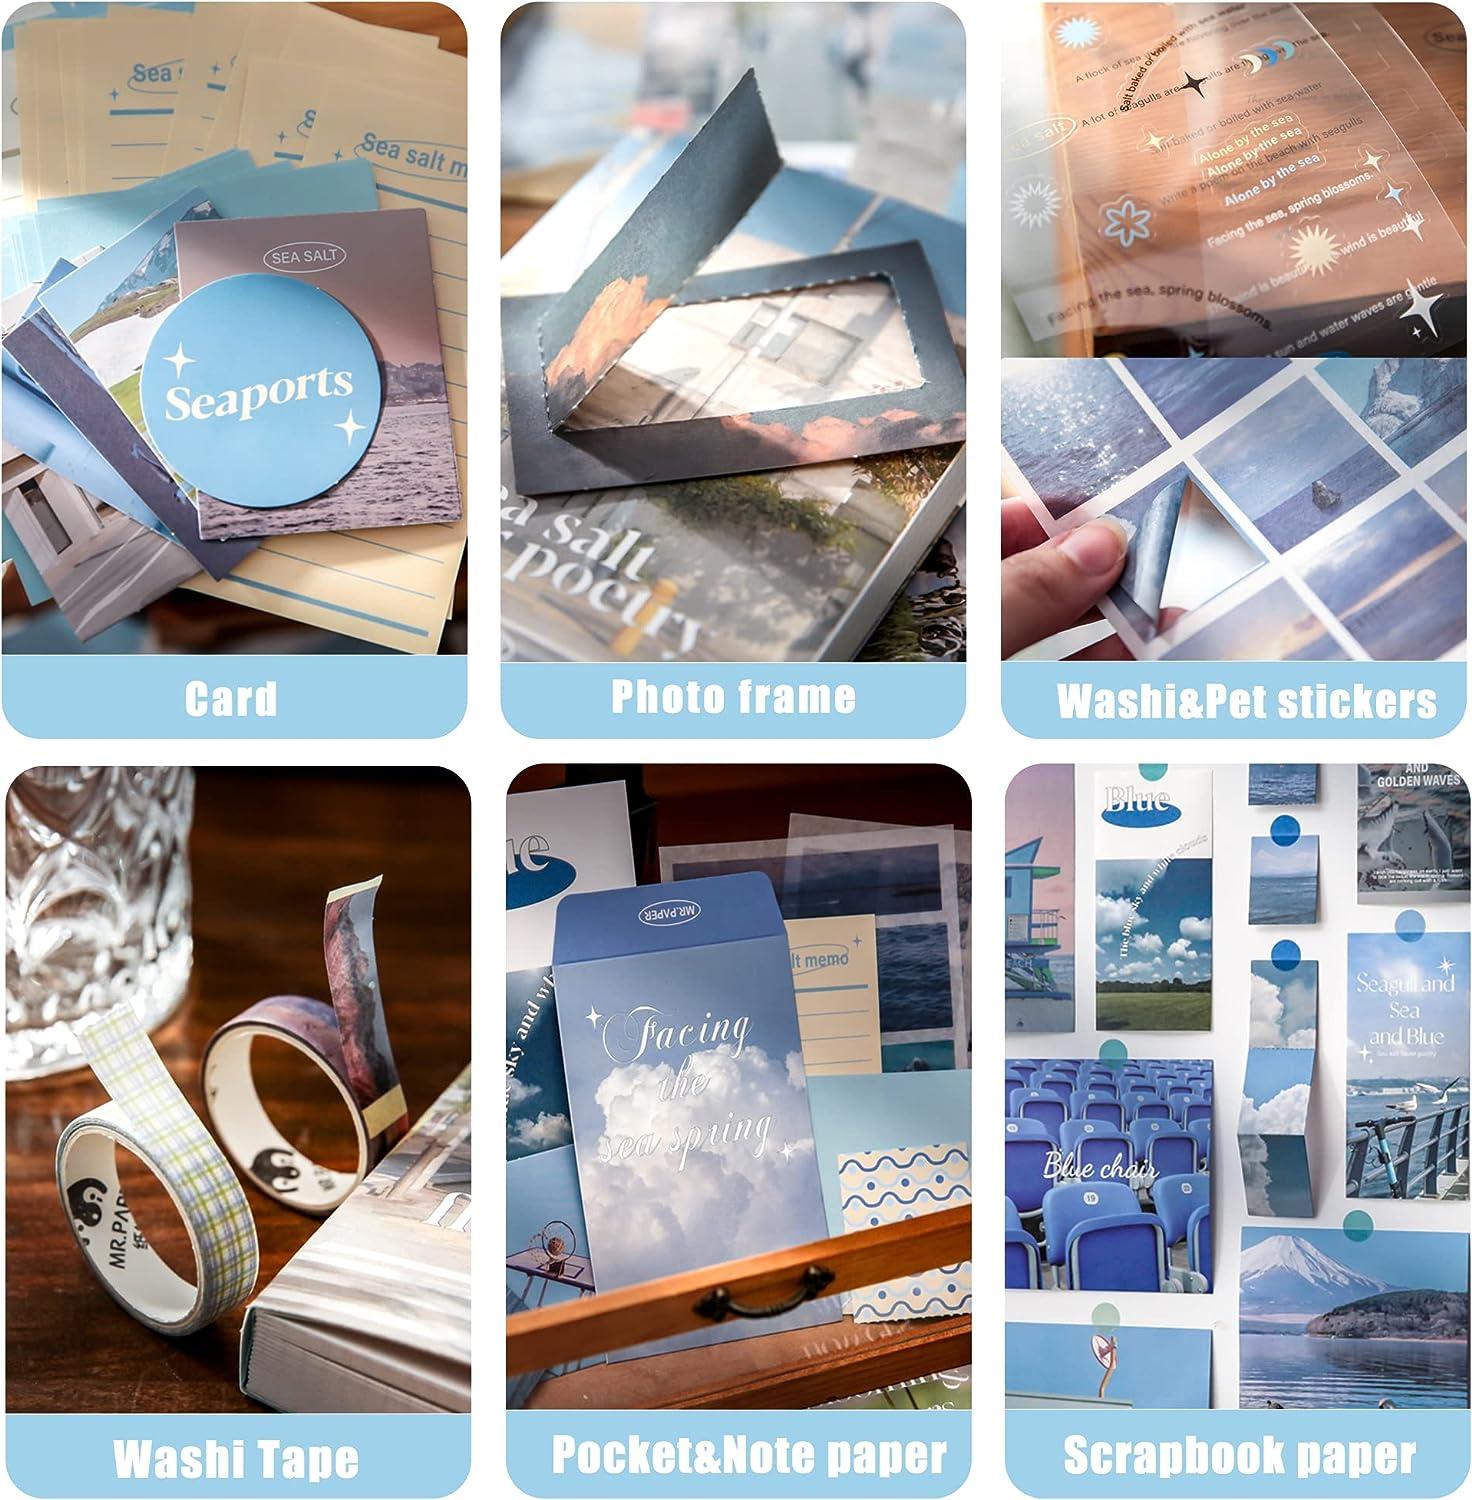 Aromoty Aesthetic Scrapbook Kit, Vintage Scrapbooking Supplies Kit for  Bullet Junk Journal, A6 Grid Notebook, Stationary Journaling Supplies,DIY  Craft Bluey Birthday Gifts for Women Kid Teen Girl 04-The Blue Sea